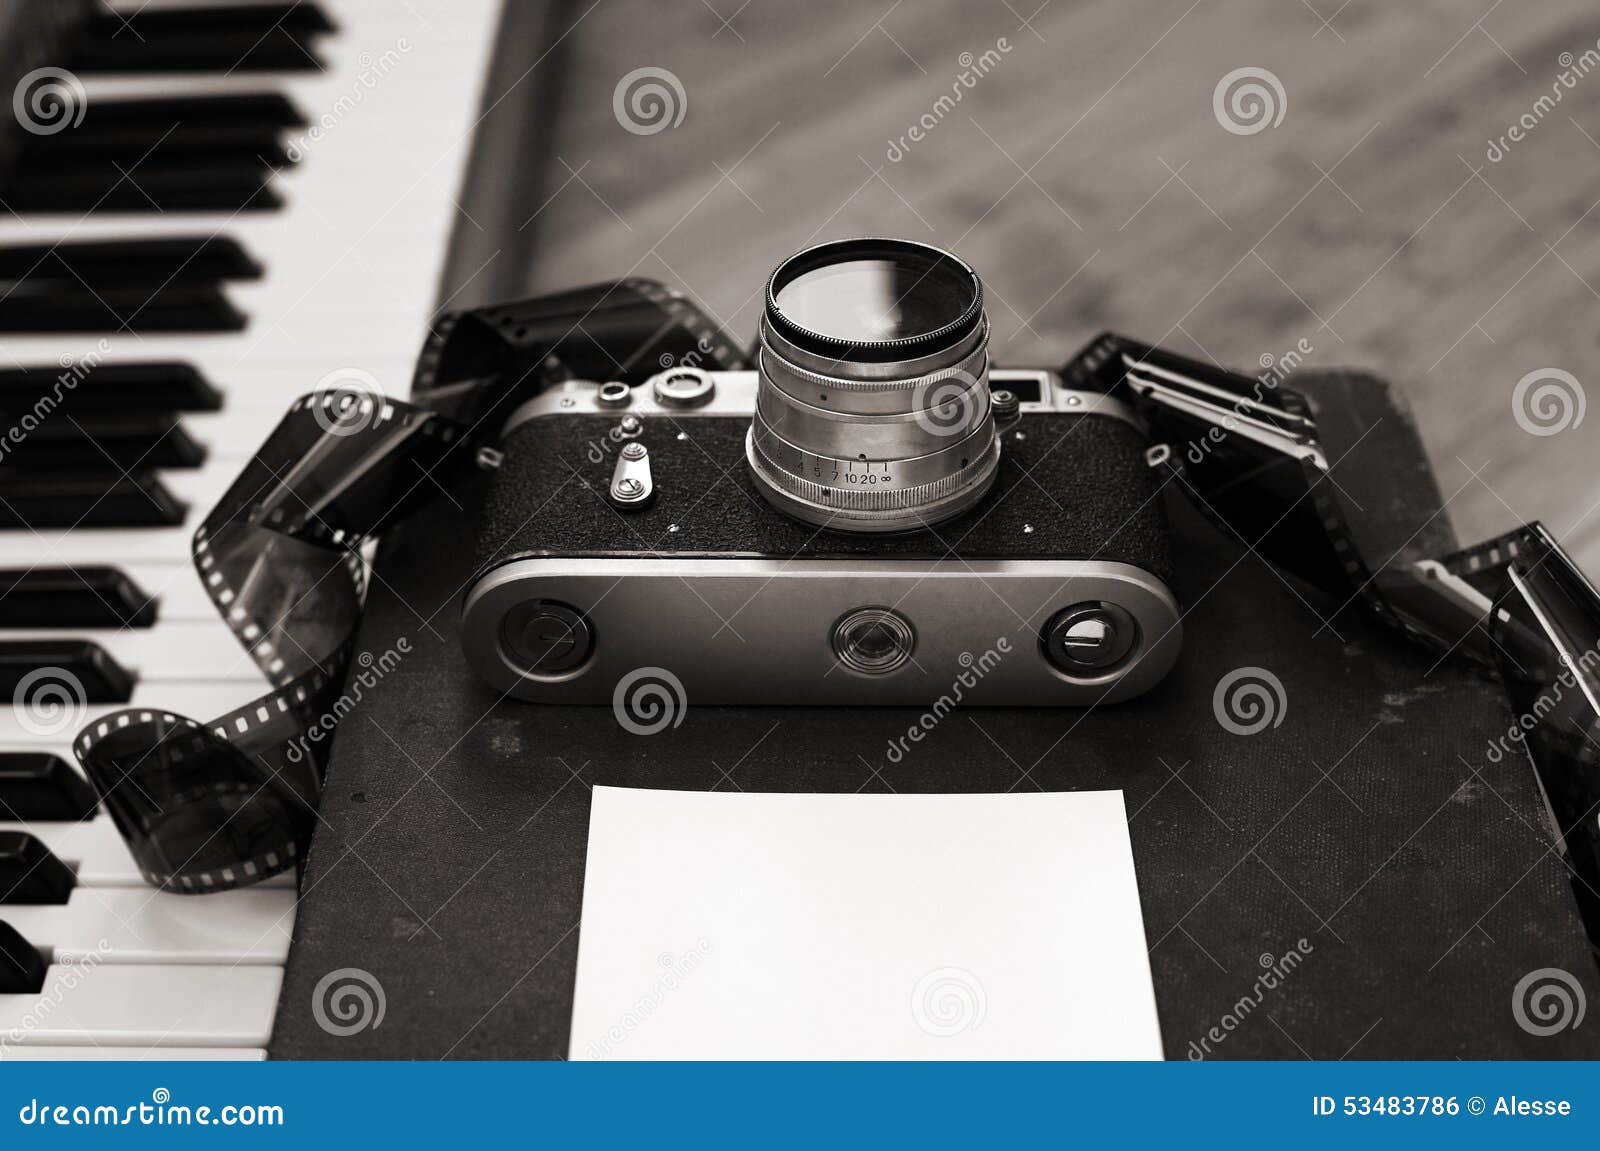 Vintage And Retro Camera Stock Photo, Picture and Royalty Free Image. Image  12064169.